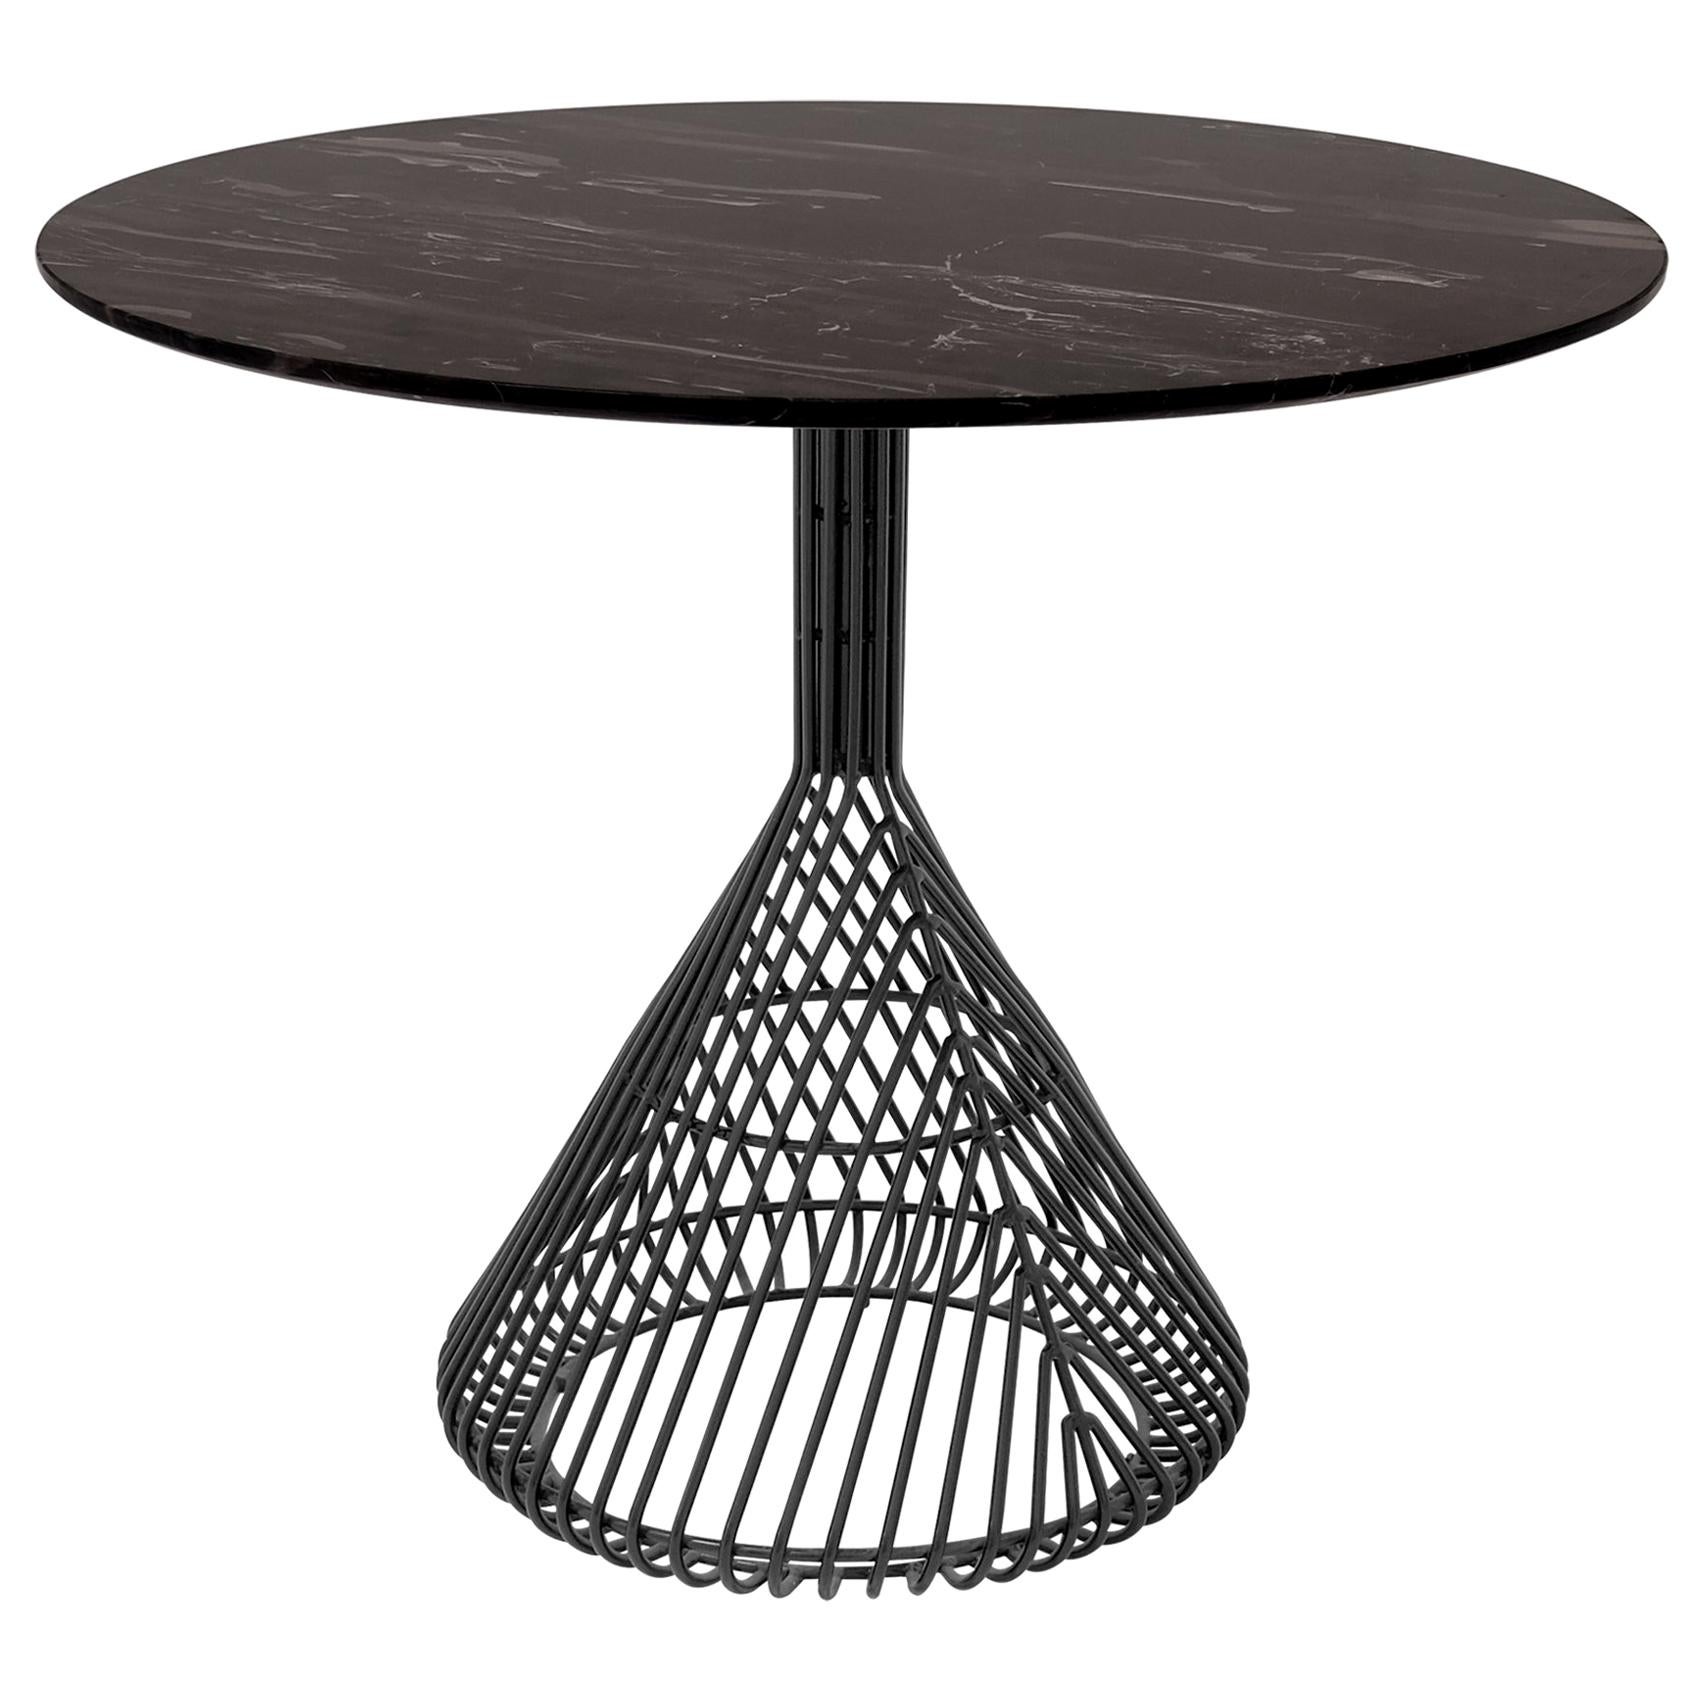 What is a bistro table?